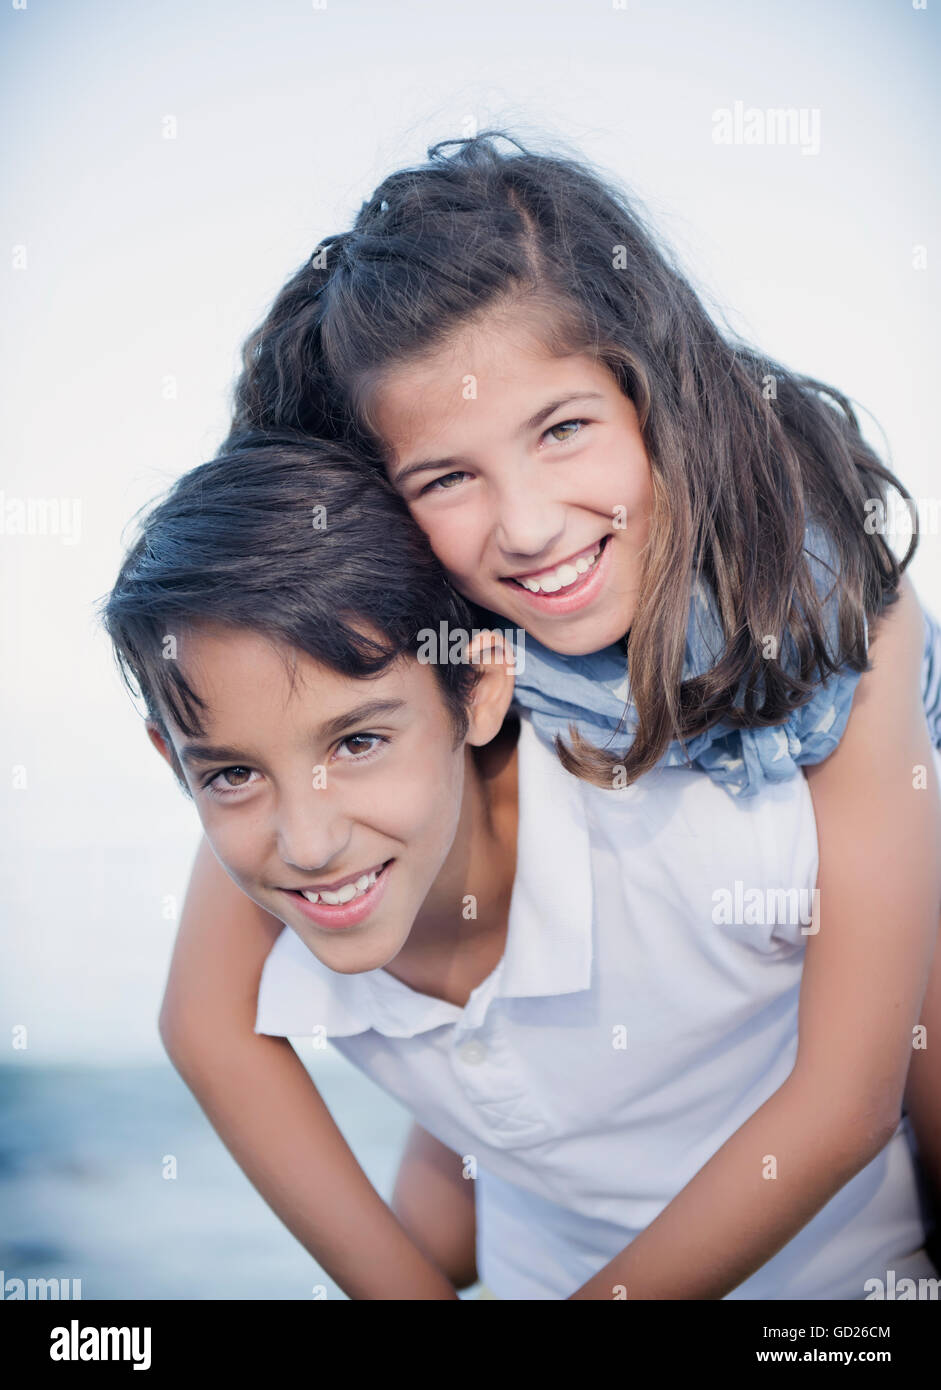 Cheerful cute boy and girl playing outdoors Stock Photo